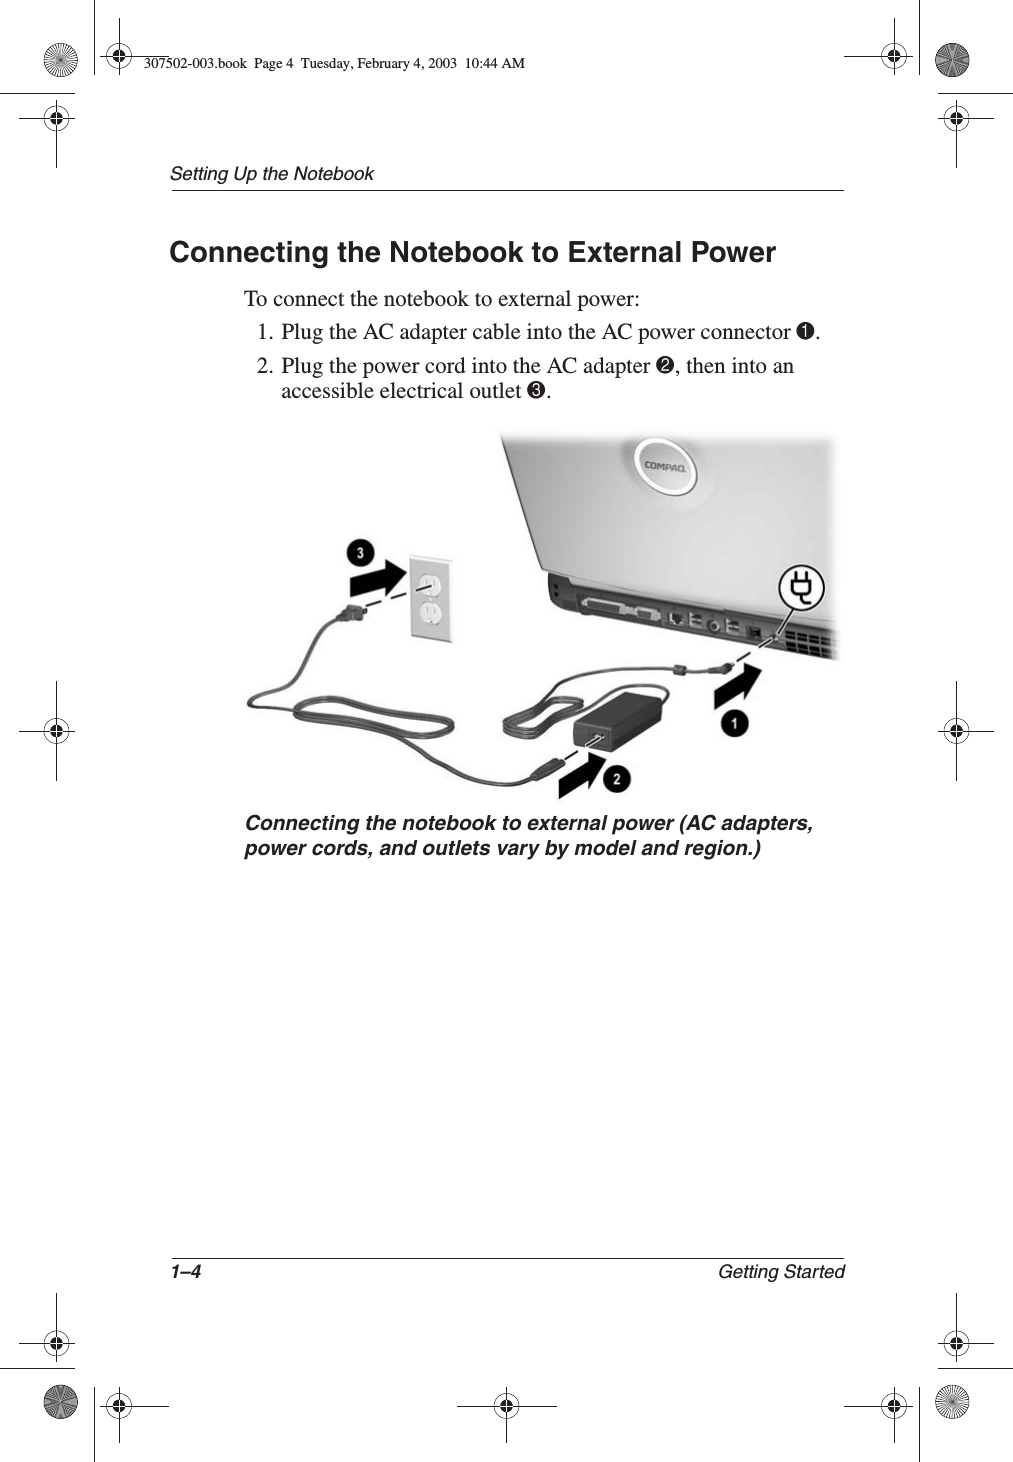 1–4 Getting StartedSetting Up the NotebookConnecting the Notebook to External PowerTo connect the notebook to external power:1. Plug the AC adapter cable into the AC power connector 1.2. Plug the power cord into the AC adapter 2, then into an accessible electrical outlet 3.Connecting the notebook to external power (AC adapters,power cords, and outlets vary by model and region.)307502-003.book  Page 4  Tuesday, February 4, 2003  10:44 AM